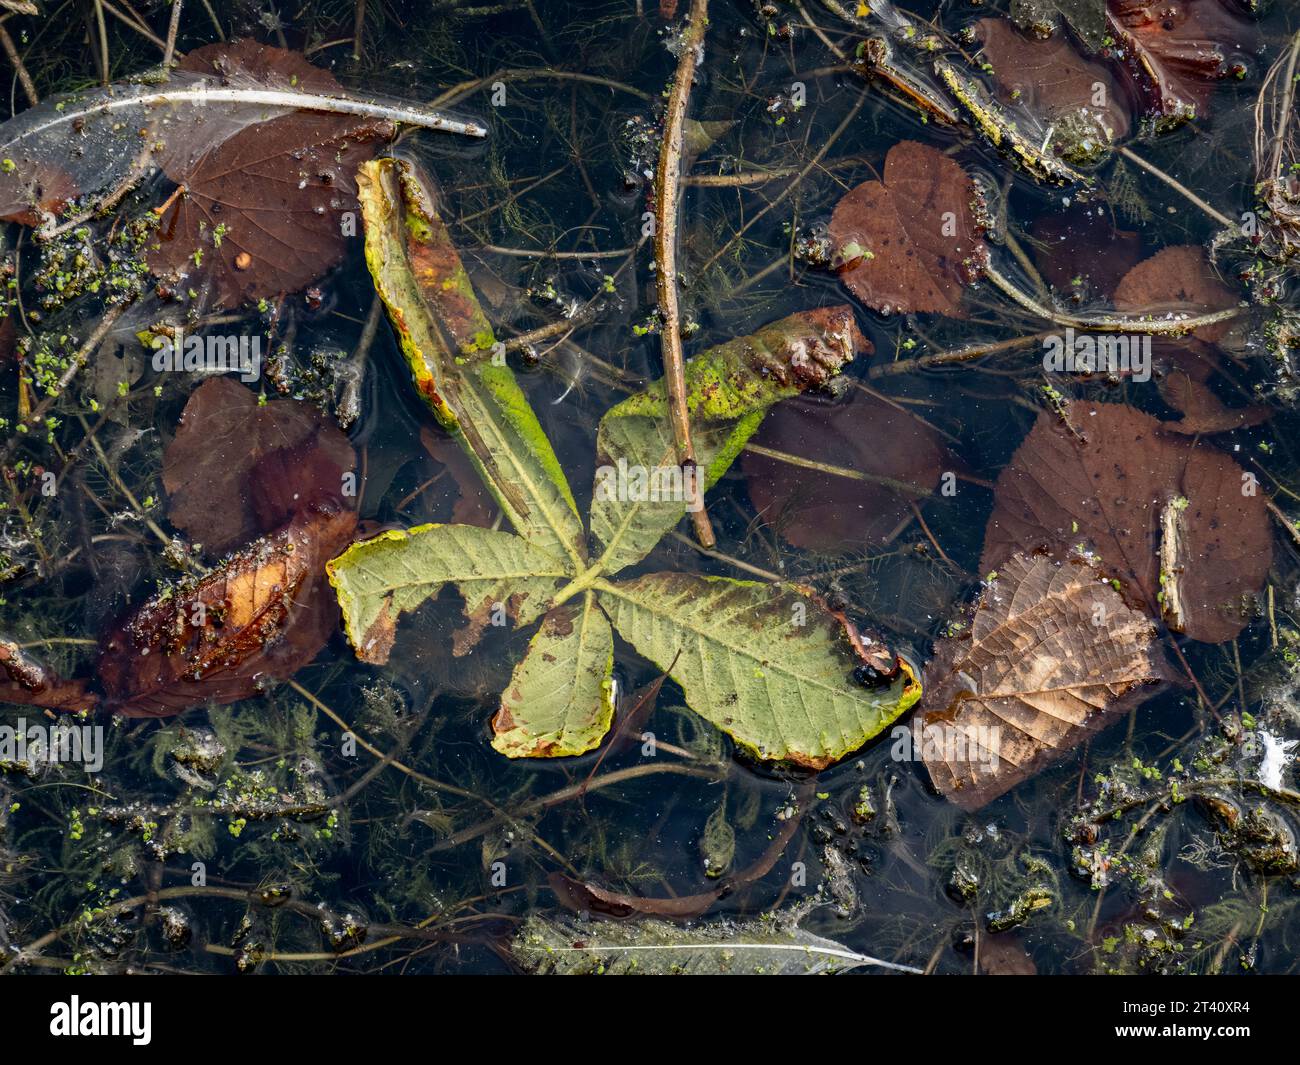 Autumn leaves fallen in a lake pollution or Autumn concept Stock Photo